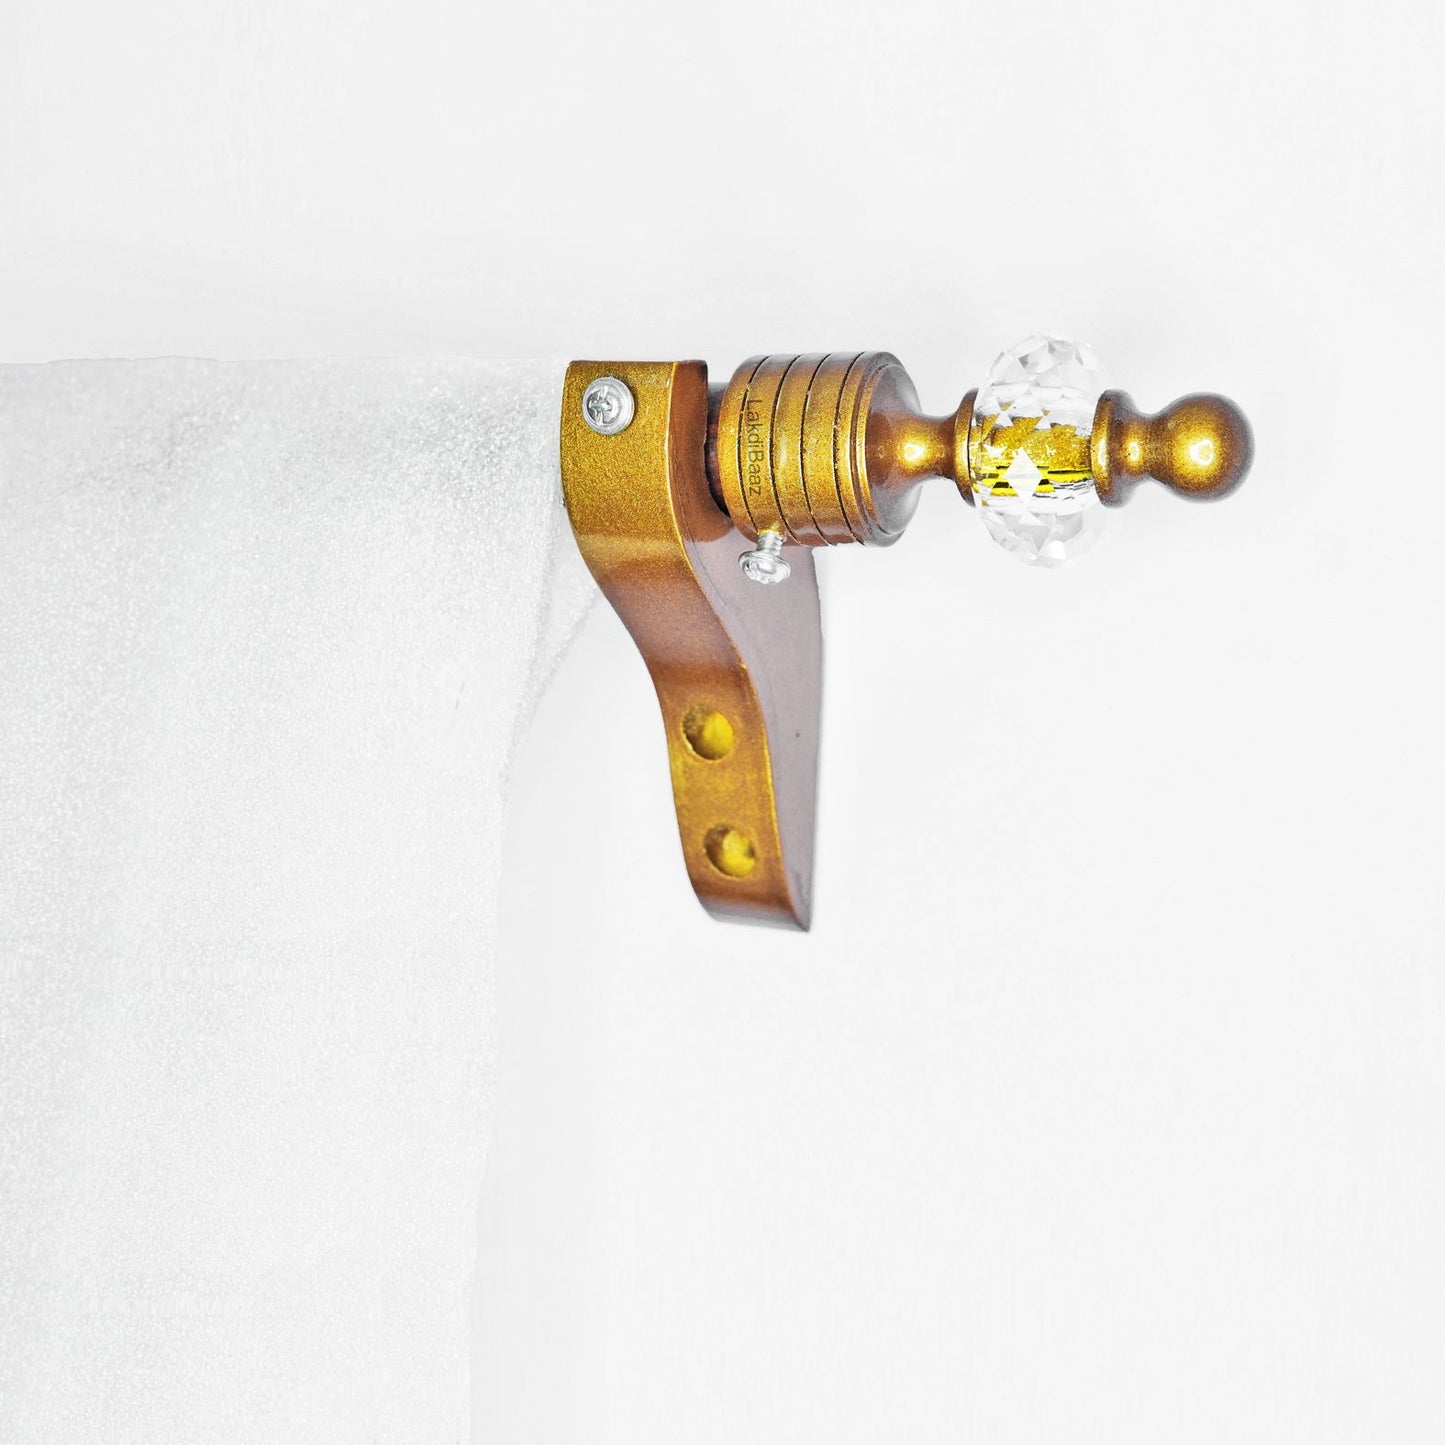 Buy Crystal Gold Paras Wooden Curtain Bracket Finials with Gold Support